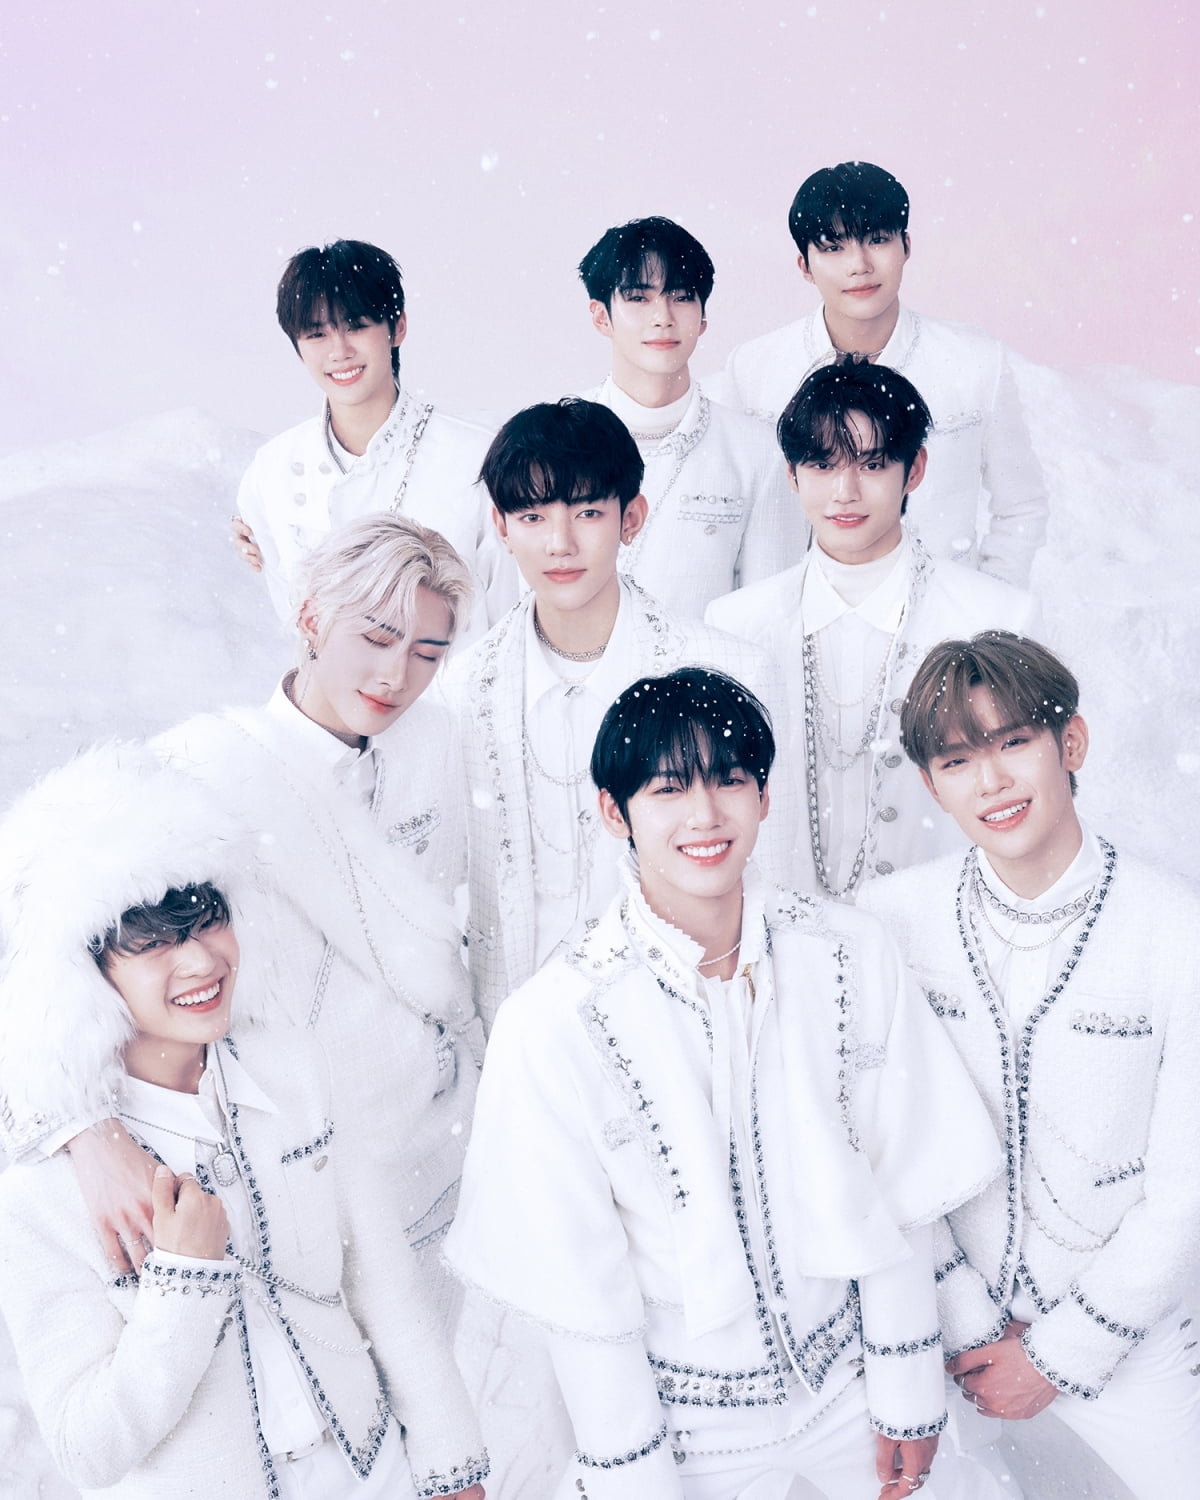 ZEROBASEONE, ‘Melting Point’ concept photo released